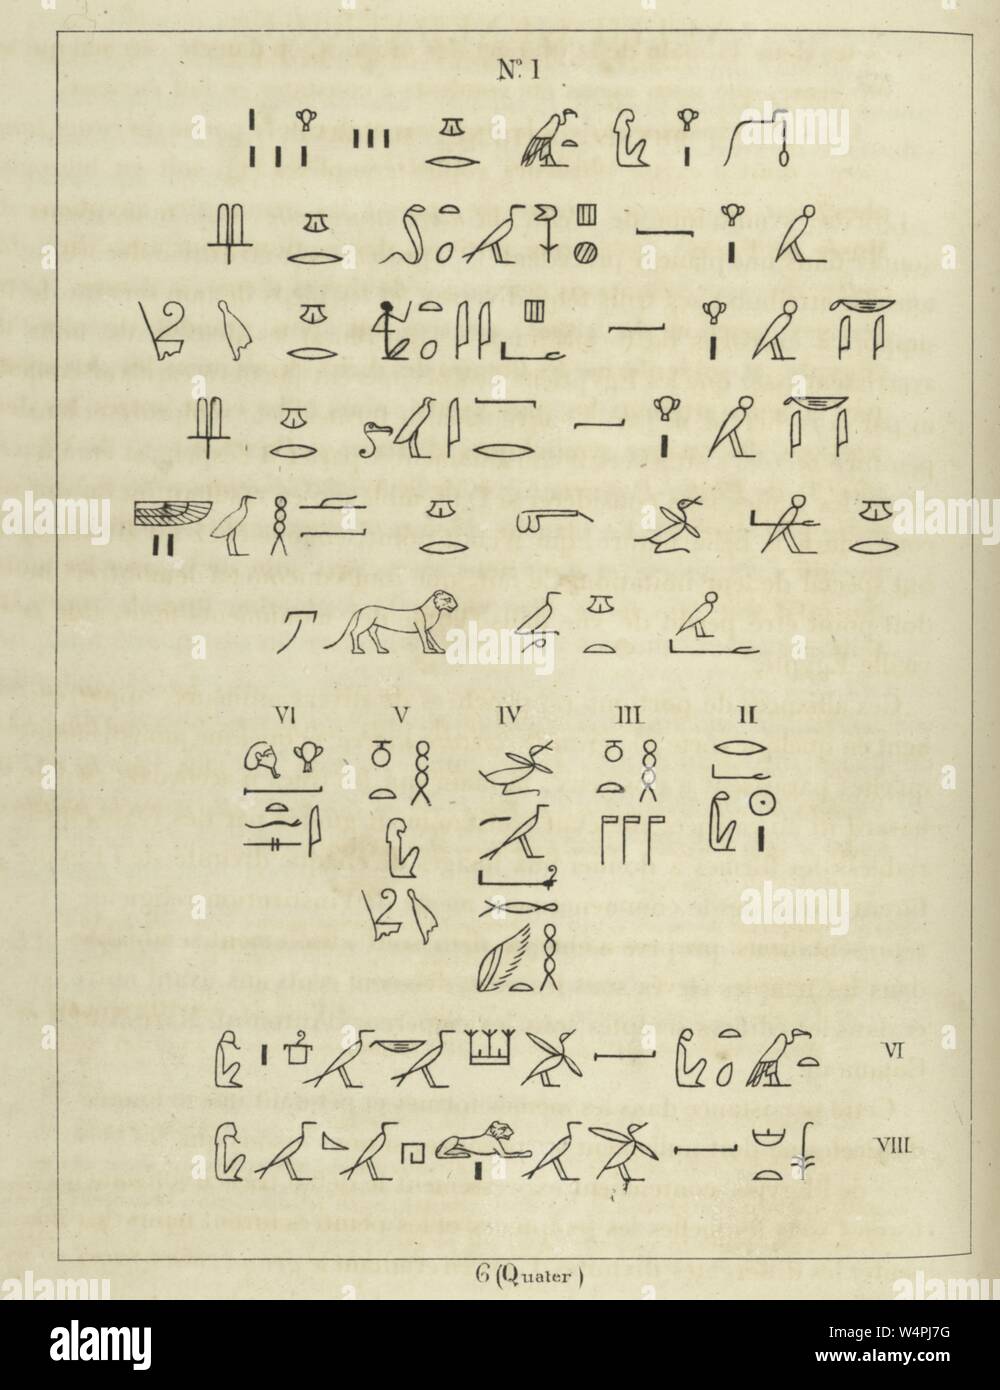 Ancient Egyptian Hieroglyphics text, illustration from the book 'Pantheon Egyptien' by Leon Jean Joseph Dubois, 1824. From the New York Public Library. () Stock Photo